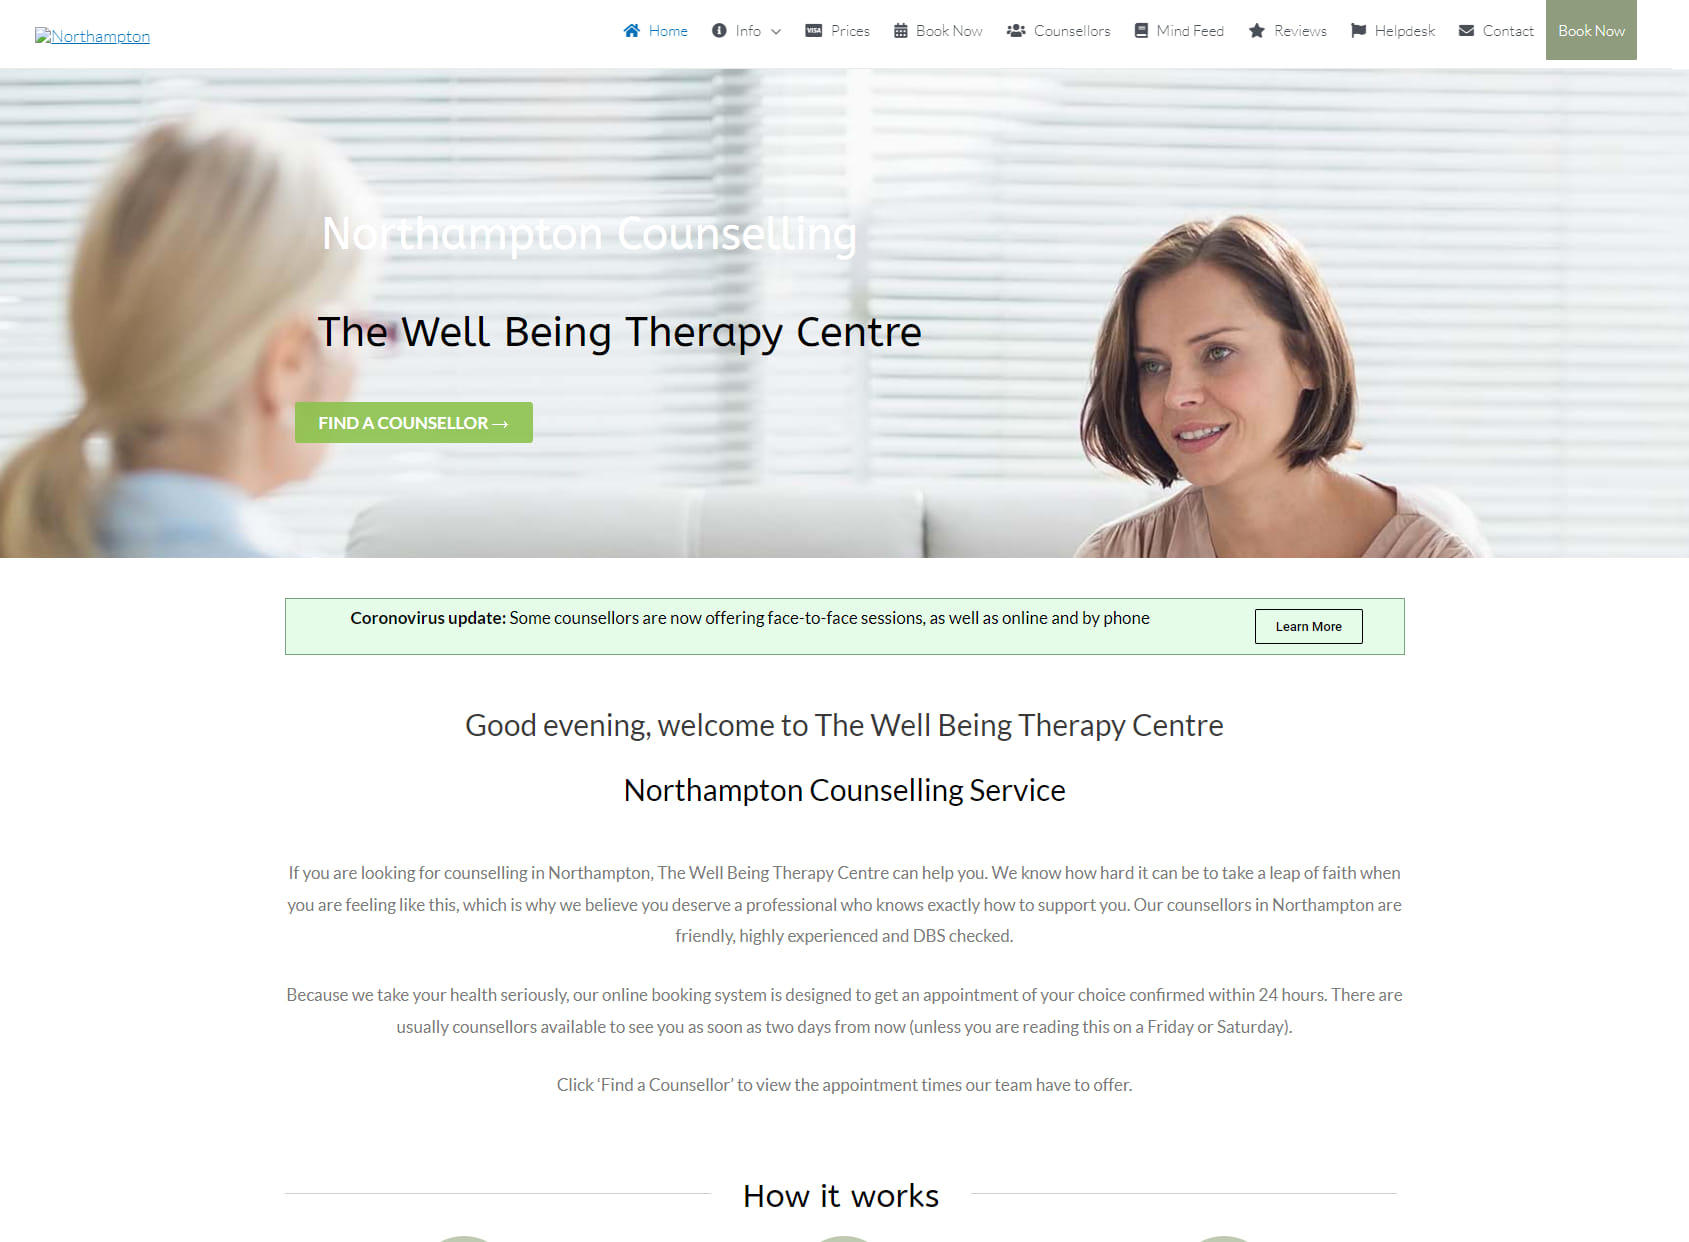 Counselling Northampton by The Well Being Therapy Centre